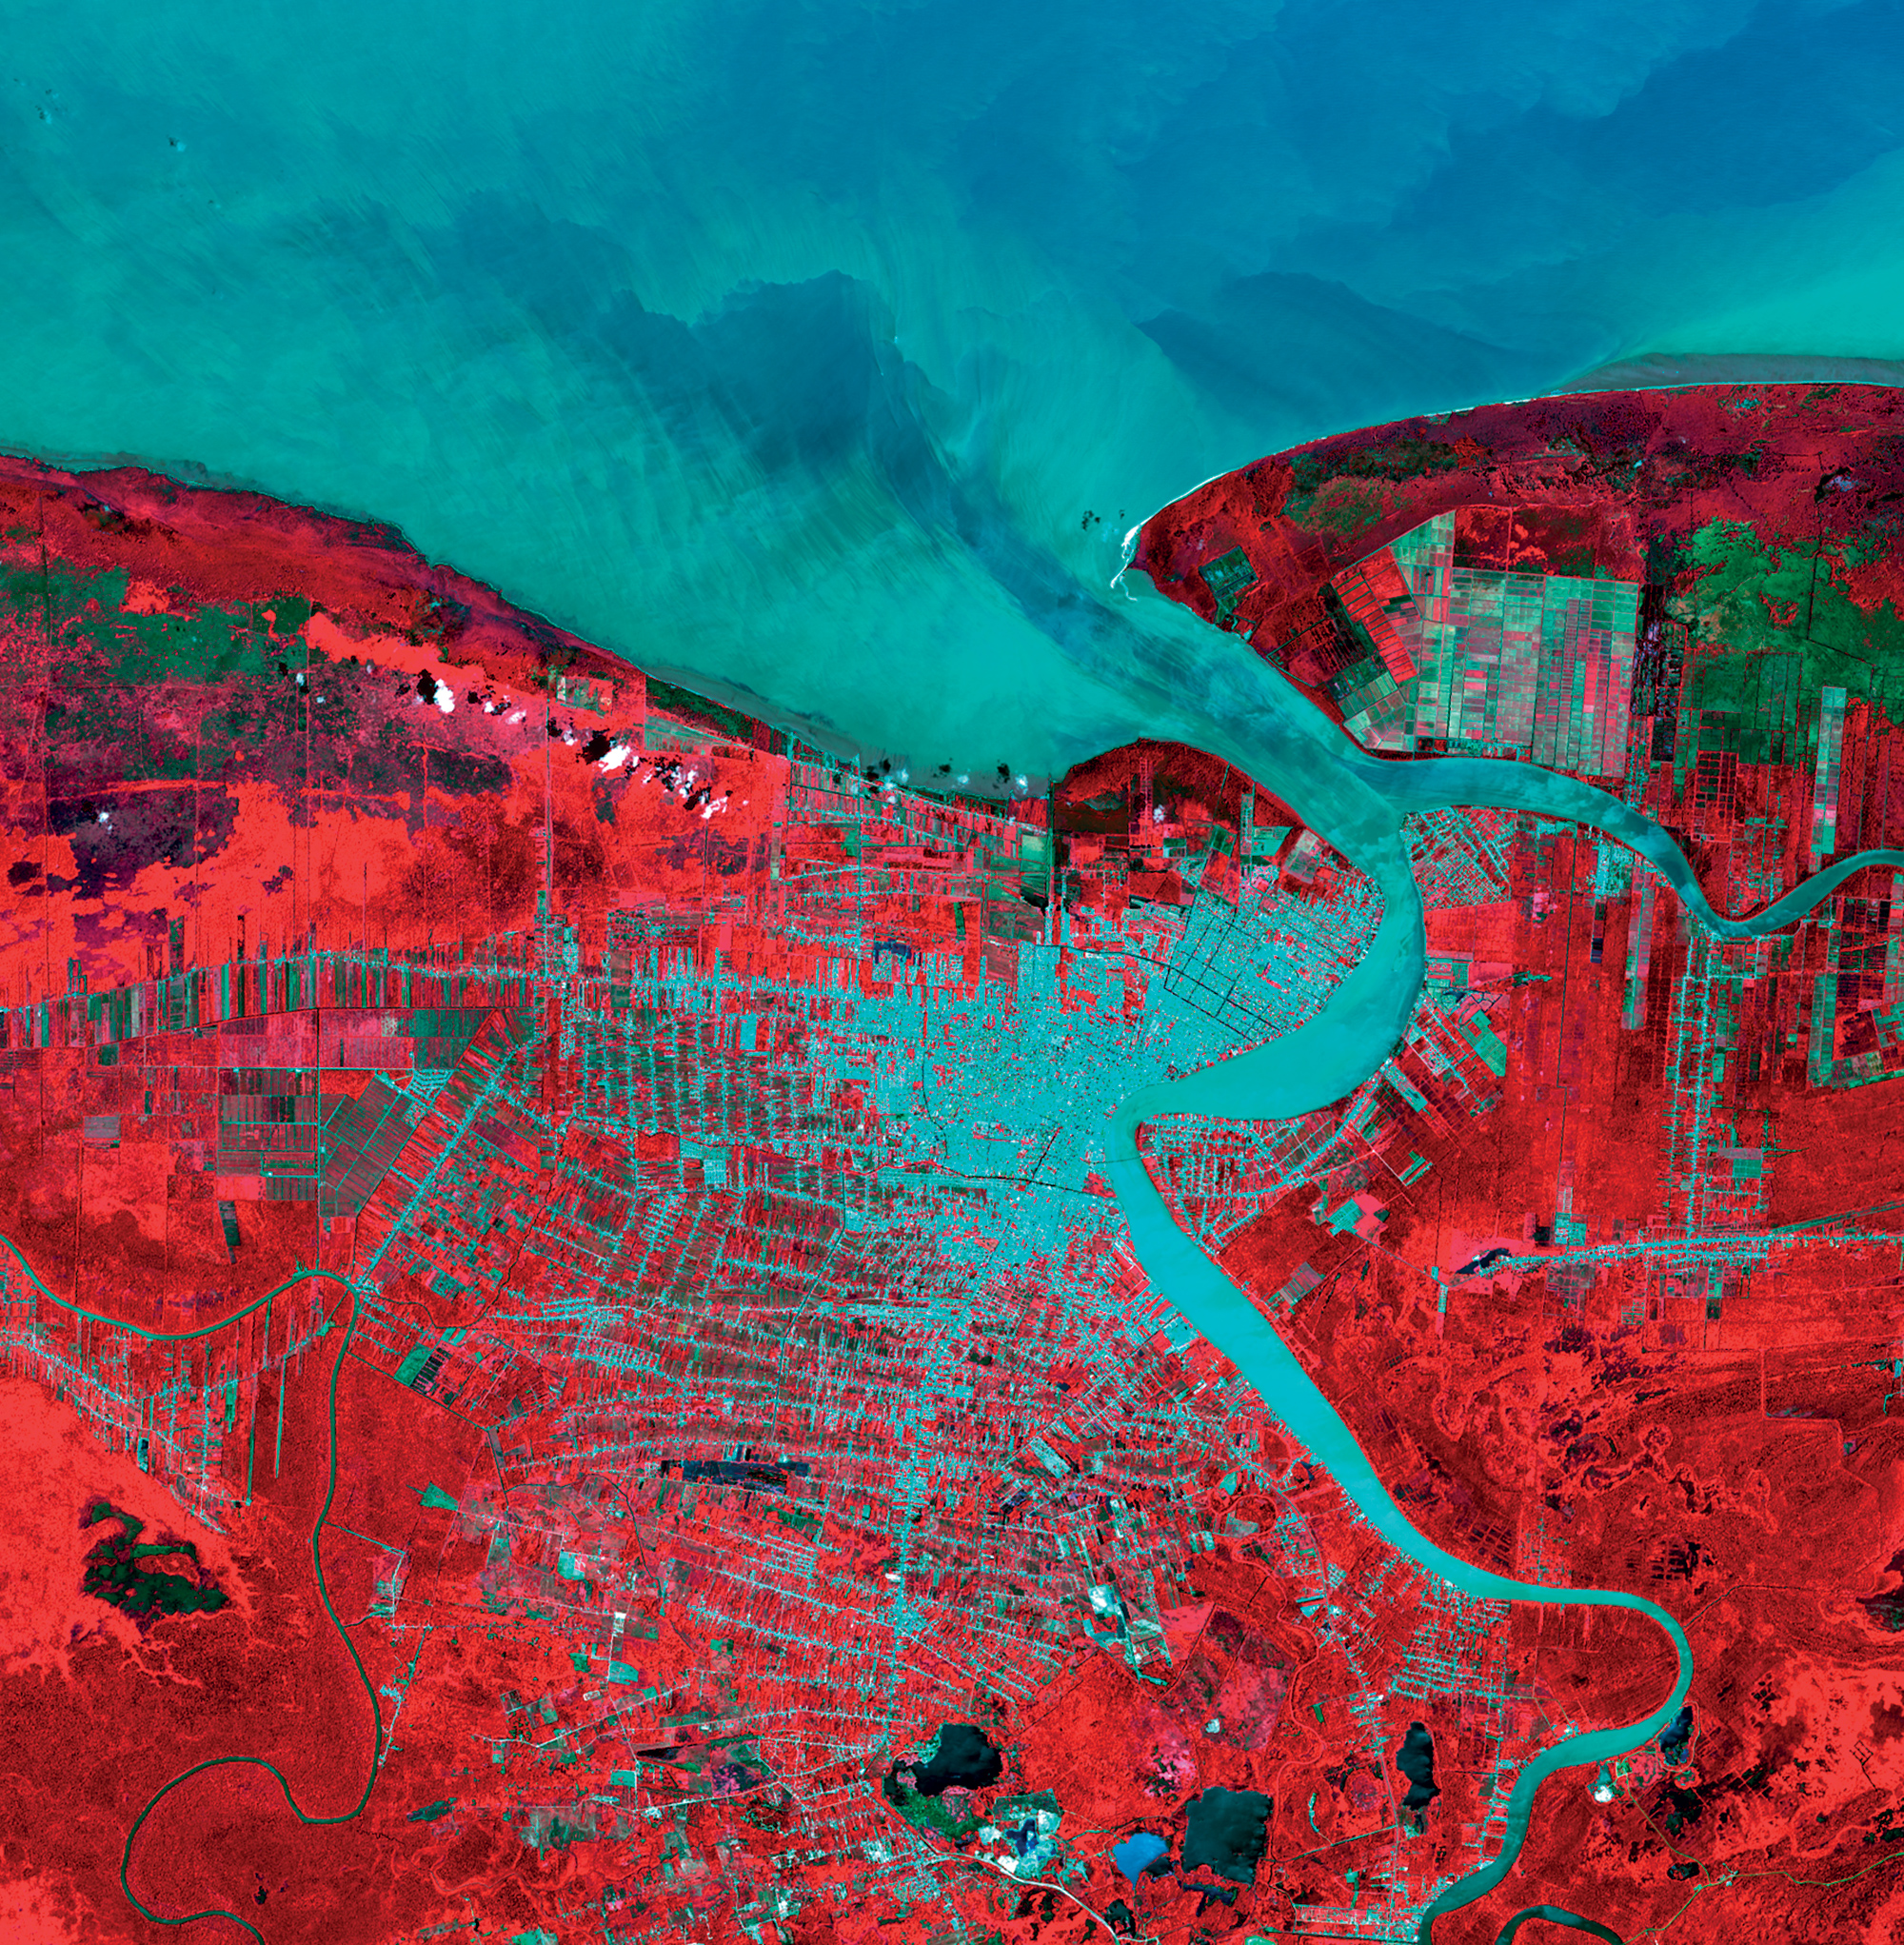 <strong>Paramaribo, Suriname</strong> <em>1:244,000</em> A former Dutch colonial town, Paramaribo is formed by long agricultural plots — most likely remnants of what’s called “fishbone” deforestation due to paths (shown in light blue) cut into forested areas (red). These fishbone patterns are reminders of the resources needed to create the region’s Dutch-inspired wooden architecture as well as of the timber exported for urban construction materials. (Landsat OLI/TIRS)